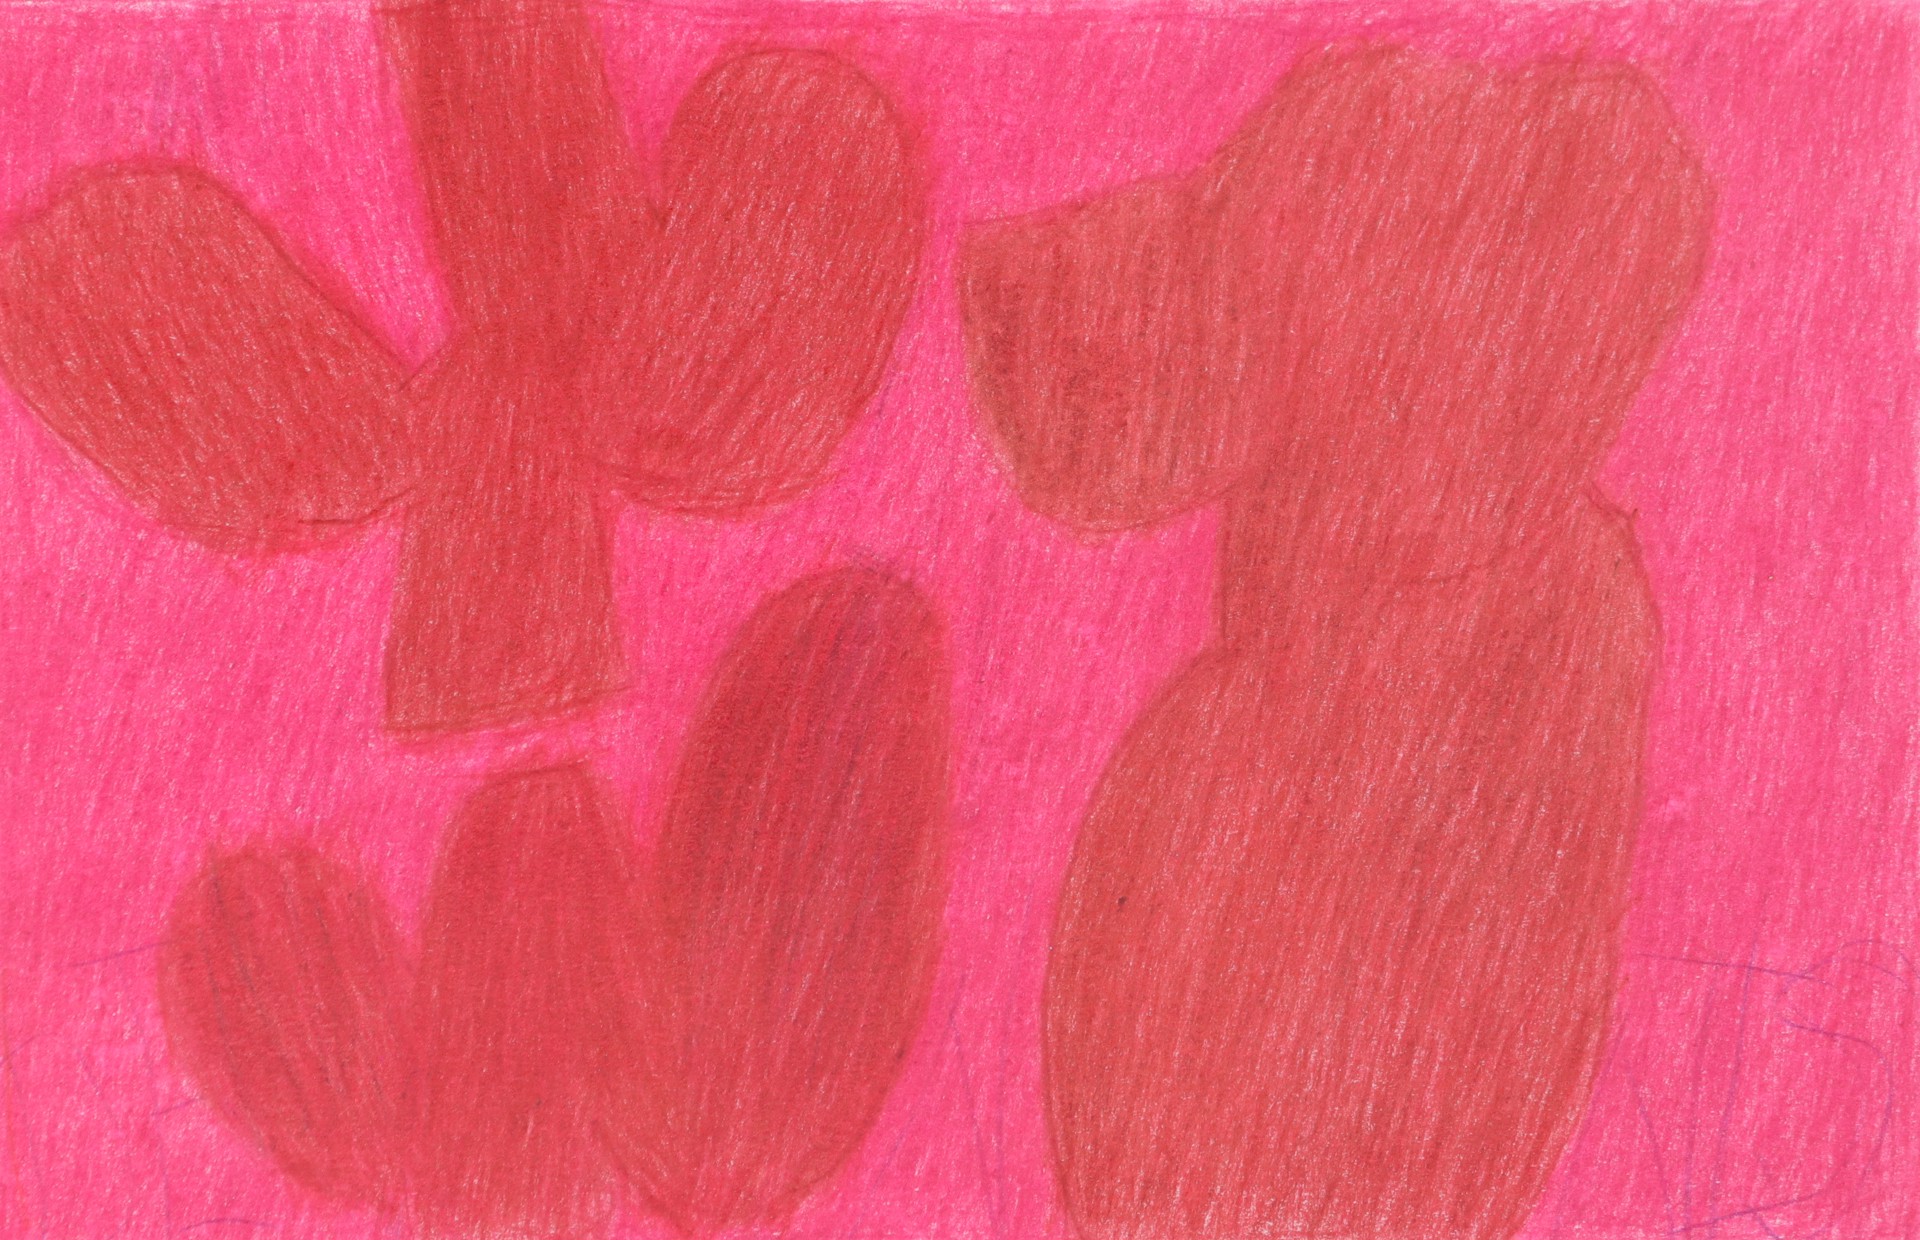 Red on Pink (digital print) by Dennis Quillin